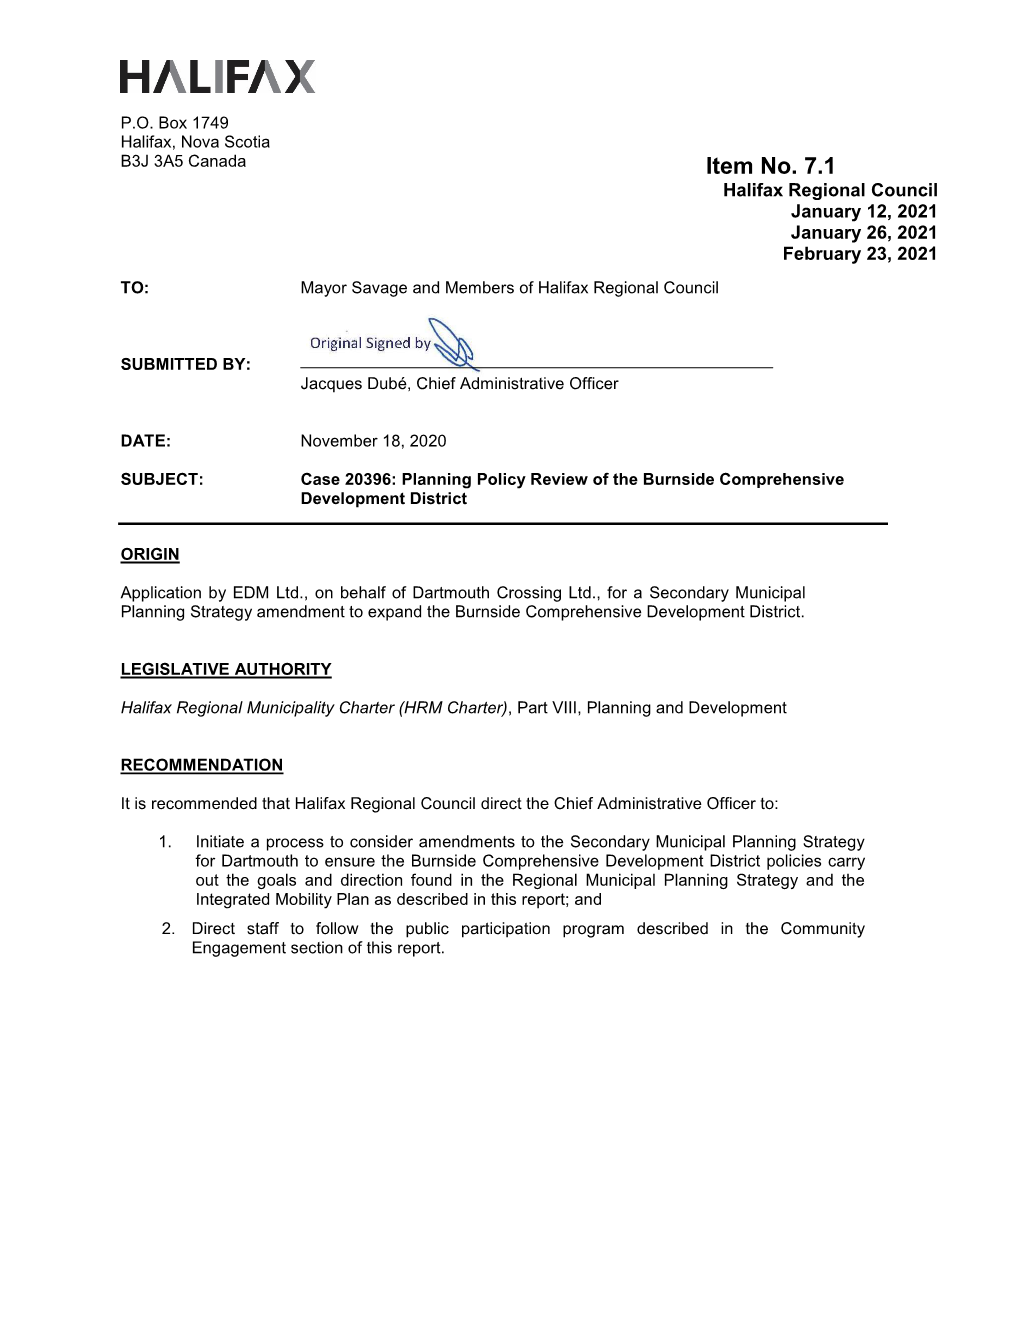 Case 20396 – Planning Policy Review of the Burnside Comprehensive Development District